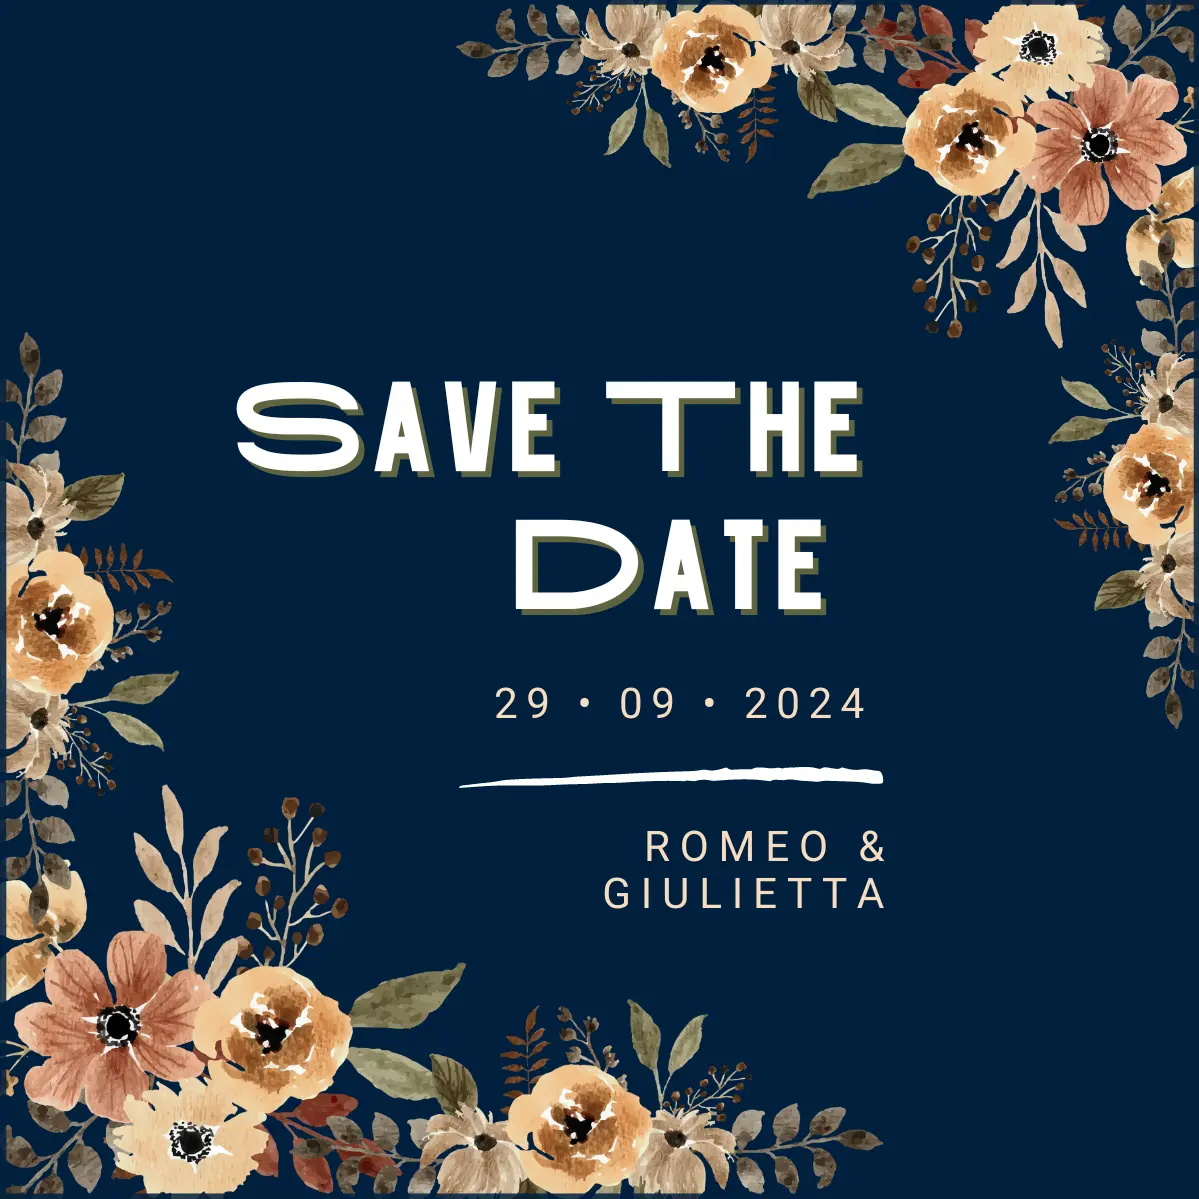 Save the date digitale 03